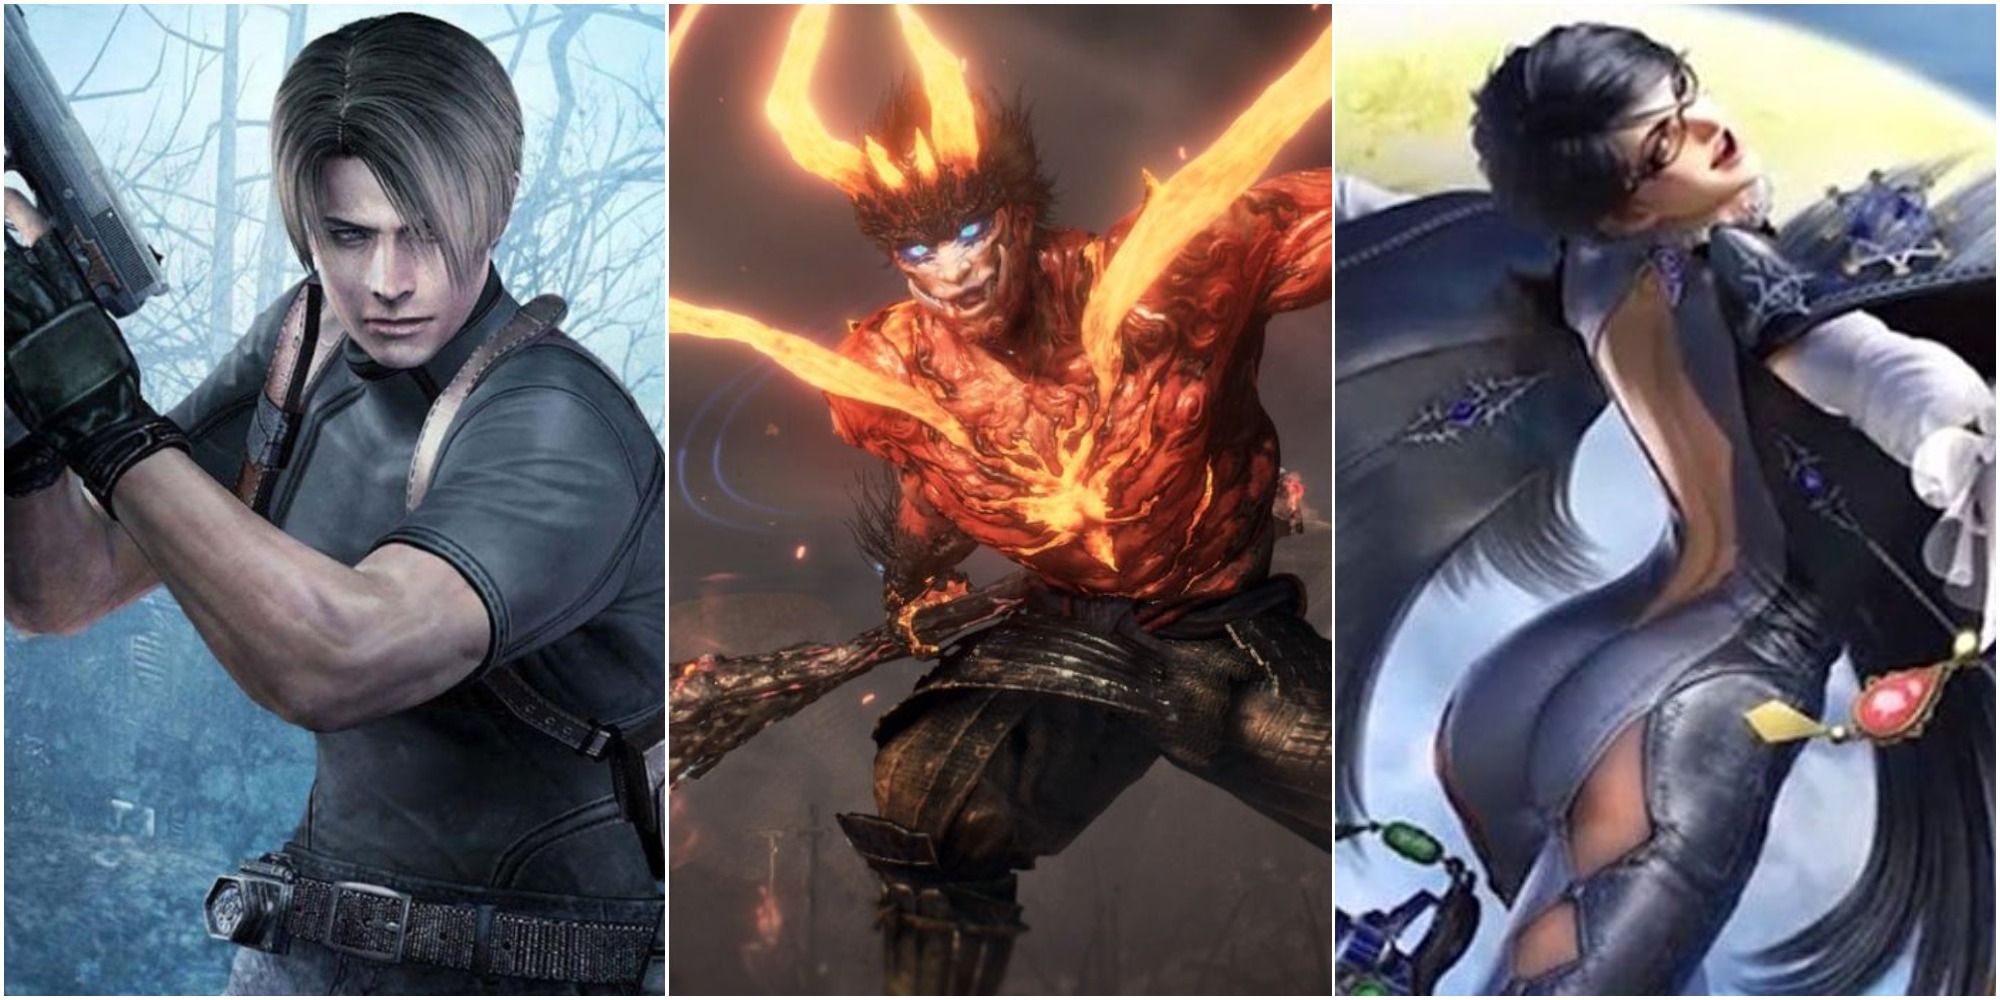 Resident Evil 4 Leon with his gun held up, a character from Nioh 2 in brute yokair form roaring, and Bayonetta with her back towards the screen and her arms held outwards, left to right